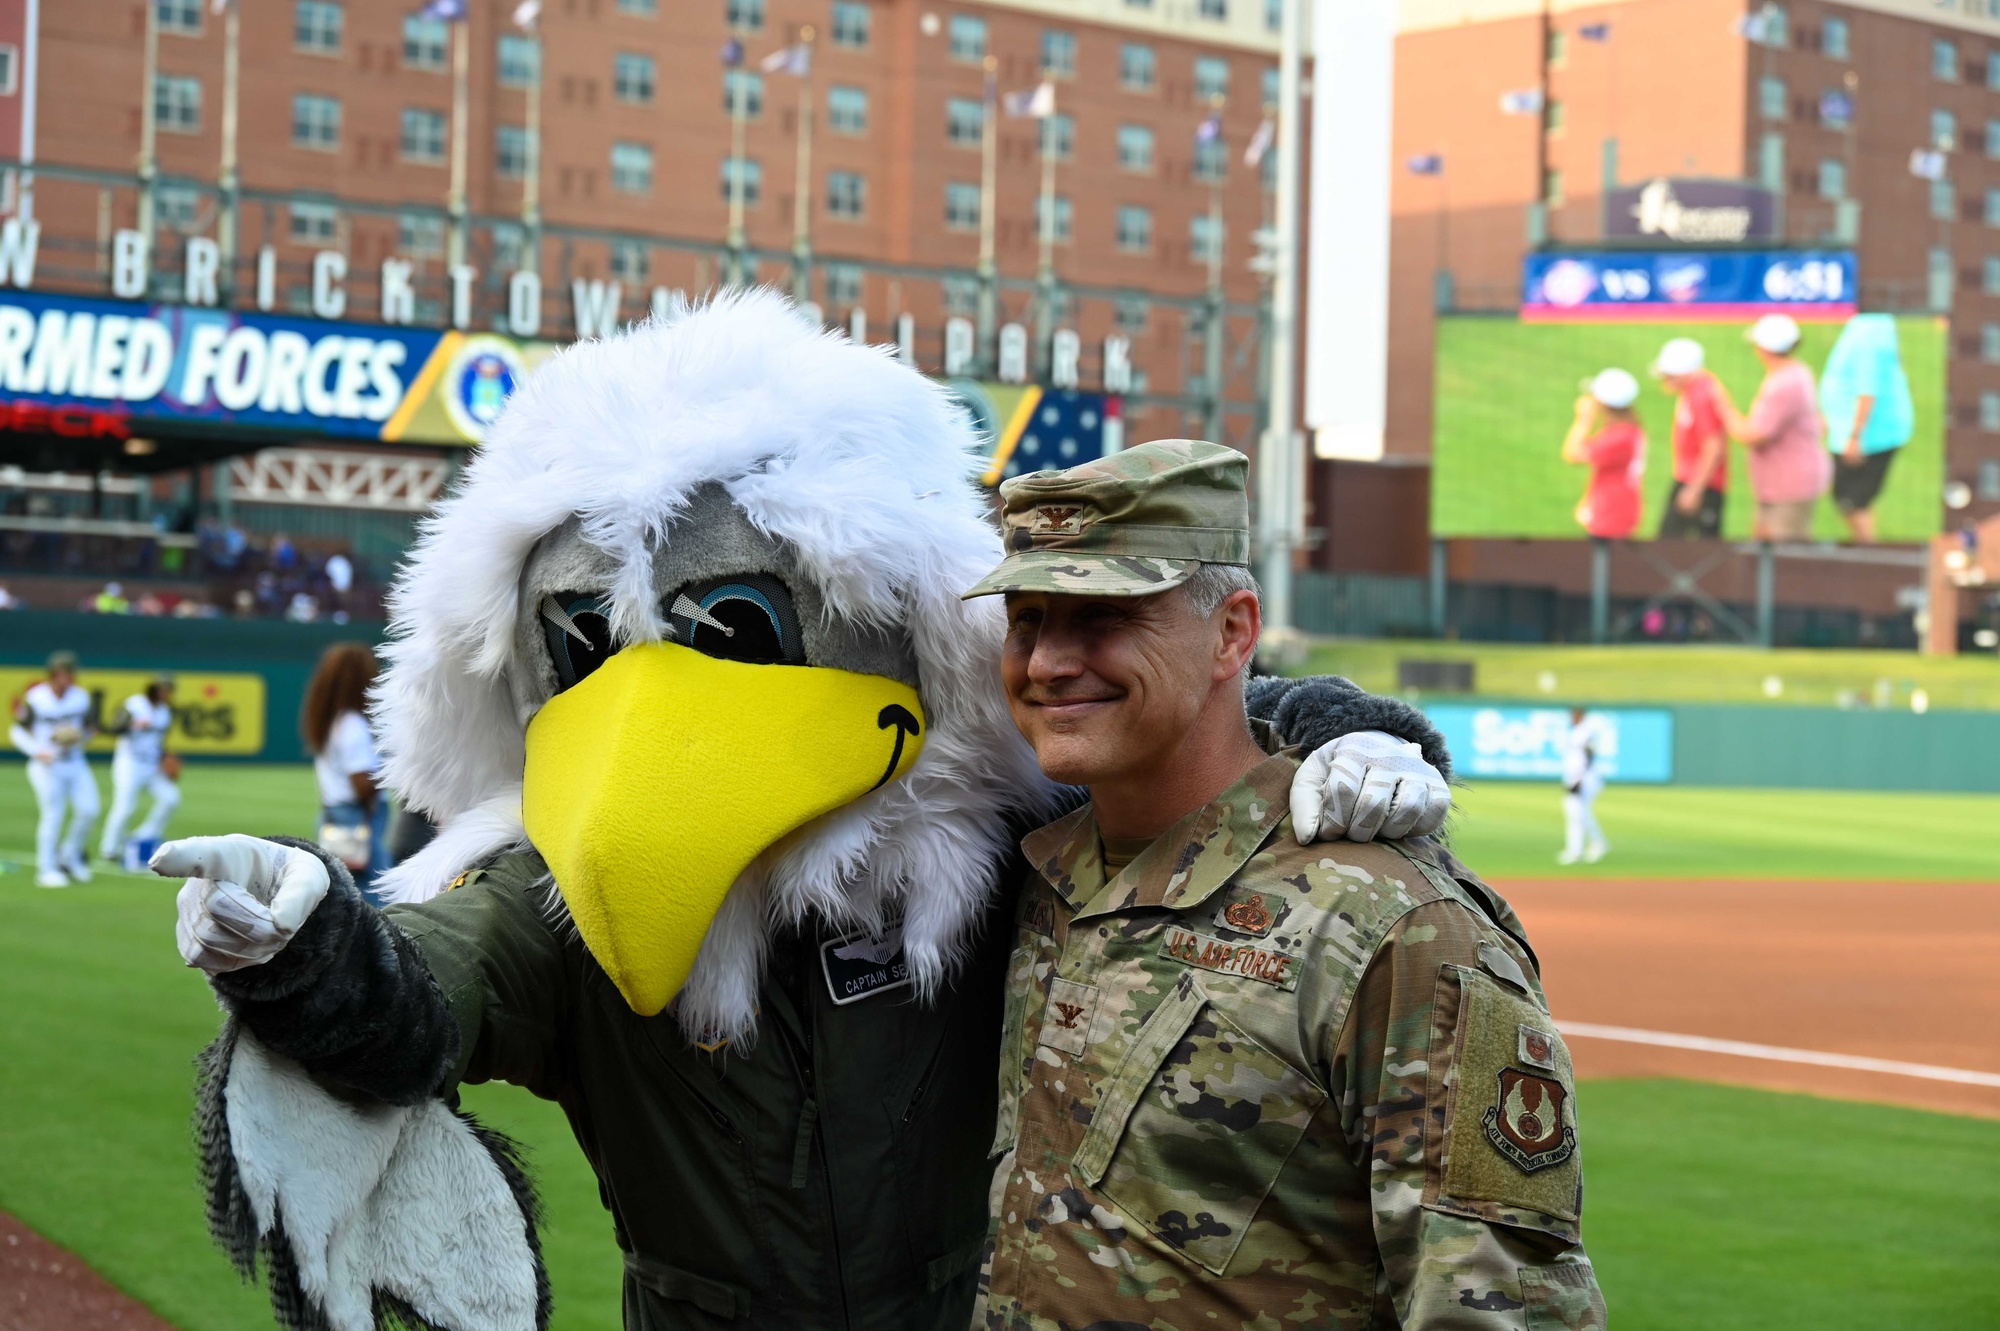 DVIDS - Images - Team Tinker stars at OKC Dodgers Salute to Armed Forces  game [Image 5 of 5]